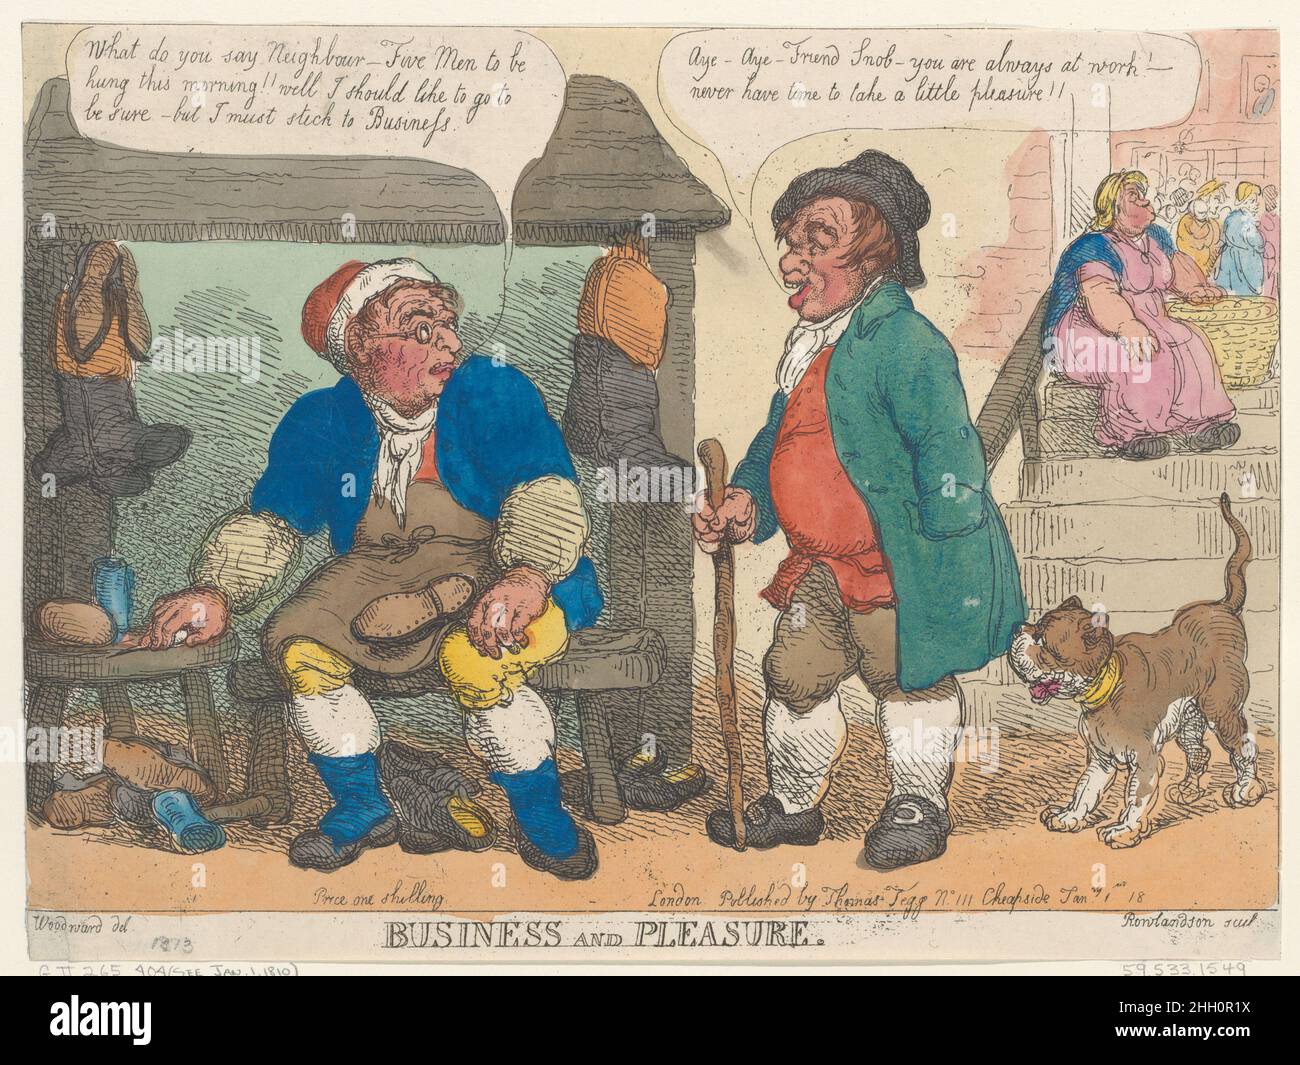 Business and Pleasure 1813 Thomas Rowlandson A cobbler and a man with a walking stick in conversation. The cobbler says, 'What do you say Neighbour – Five Men to be hung this morning!! well I should like to go to be sure, but I must stick to Business.' The other man responds, 'Aye Aye Friend Snob – you are always at work – never have time to take a little pleasure!!'. Business and Pleasure. Thomas Rowlandson (British, London 1757–1827 London). 1813. Hand-colored etching. Thomas Tegg (British, 1776–1846). Prints Stock Photo